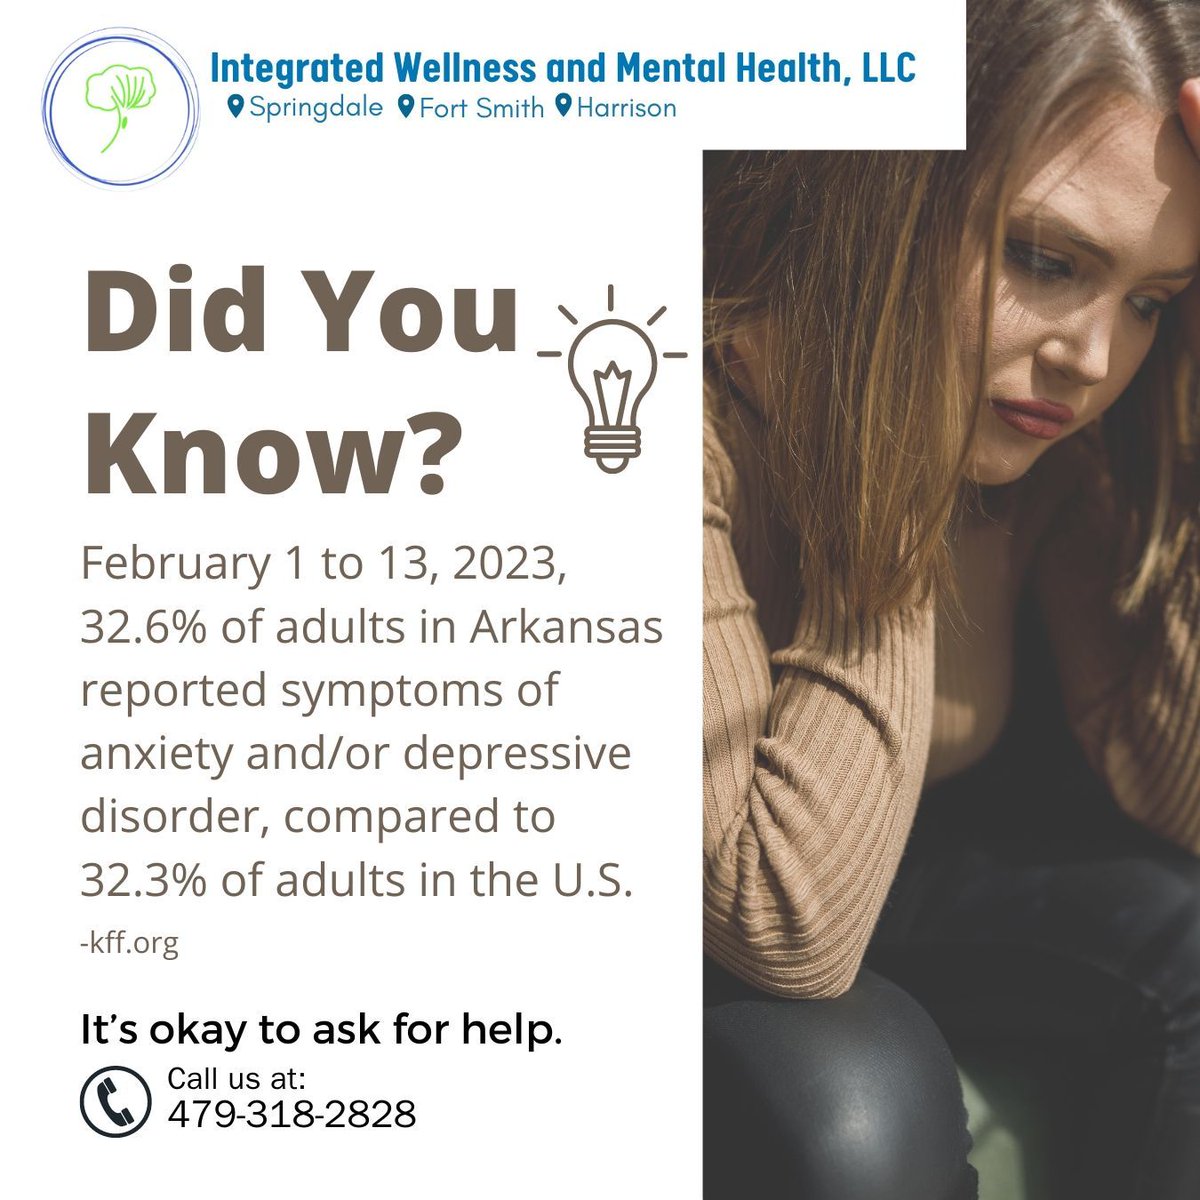 Did You Know?
It's okay to ask for help! Call us for an appointment today! dial 479-318-2828
#friday
#anxiety
#yourfeelingsarevalid
#askforhelp
#MentalHealthForadults
#wellbeing
#mentalhealthawareness
#depressivedisorder
#anxietyanddepressionawareness
#mentalhealthmatters
#mental